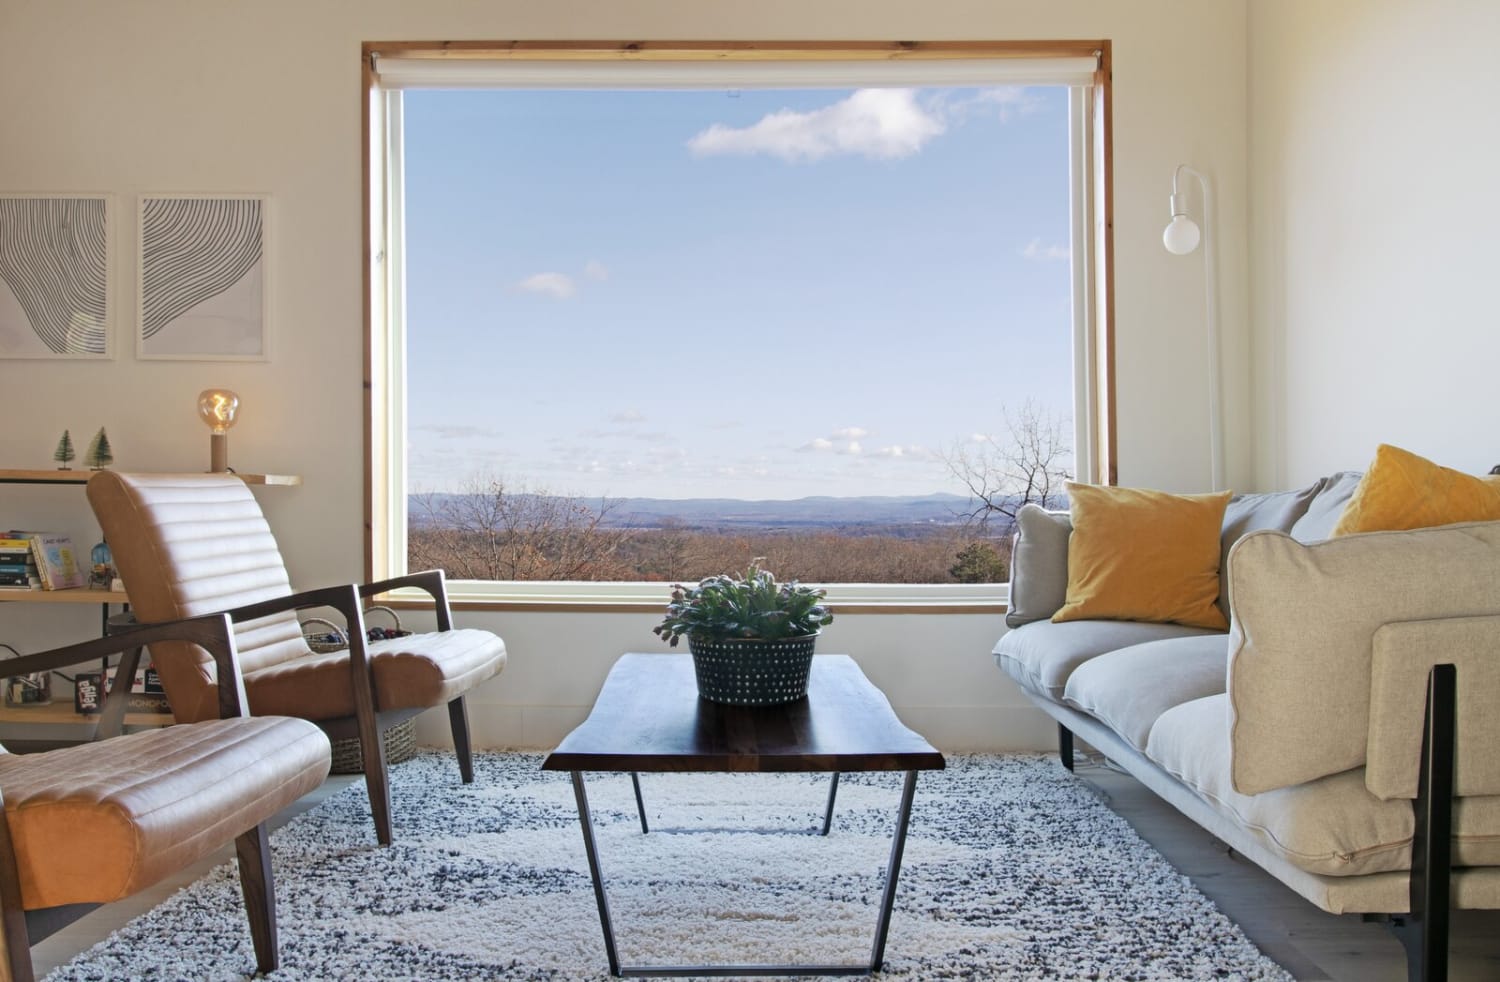 This 3-Story Rental Home in the Catskills Is Modeled After a Watchtower